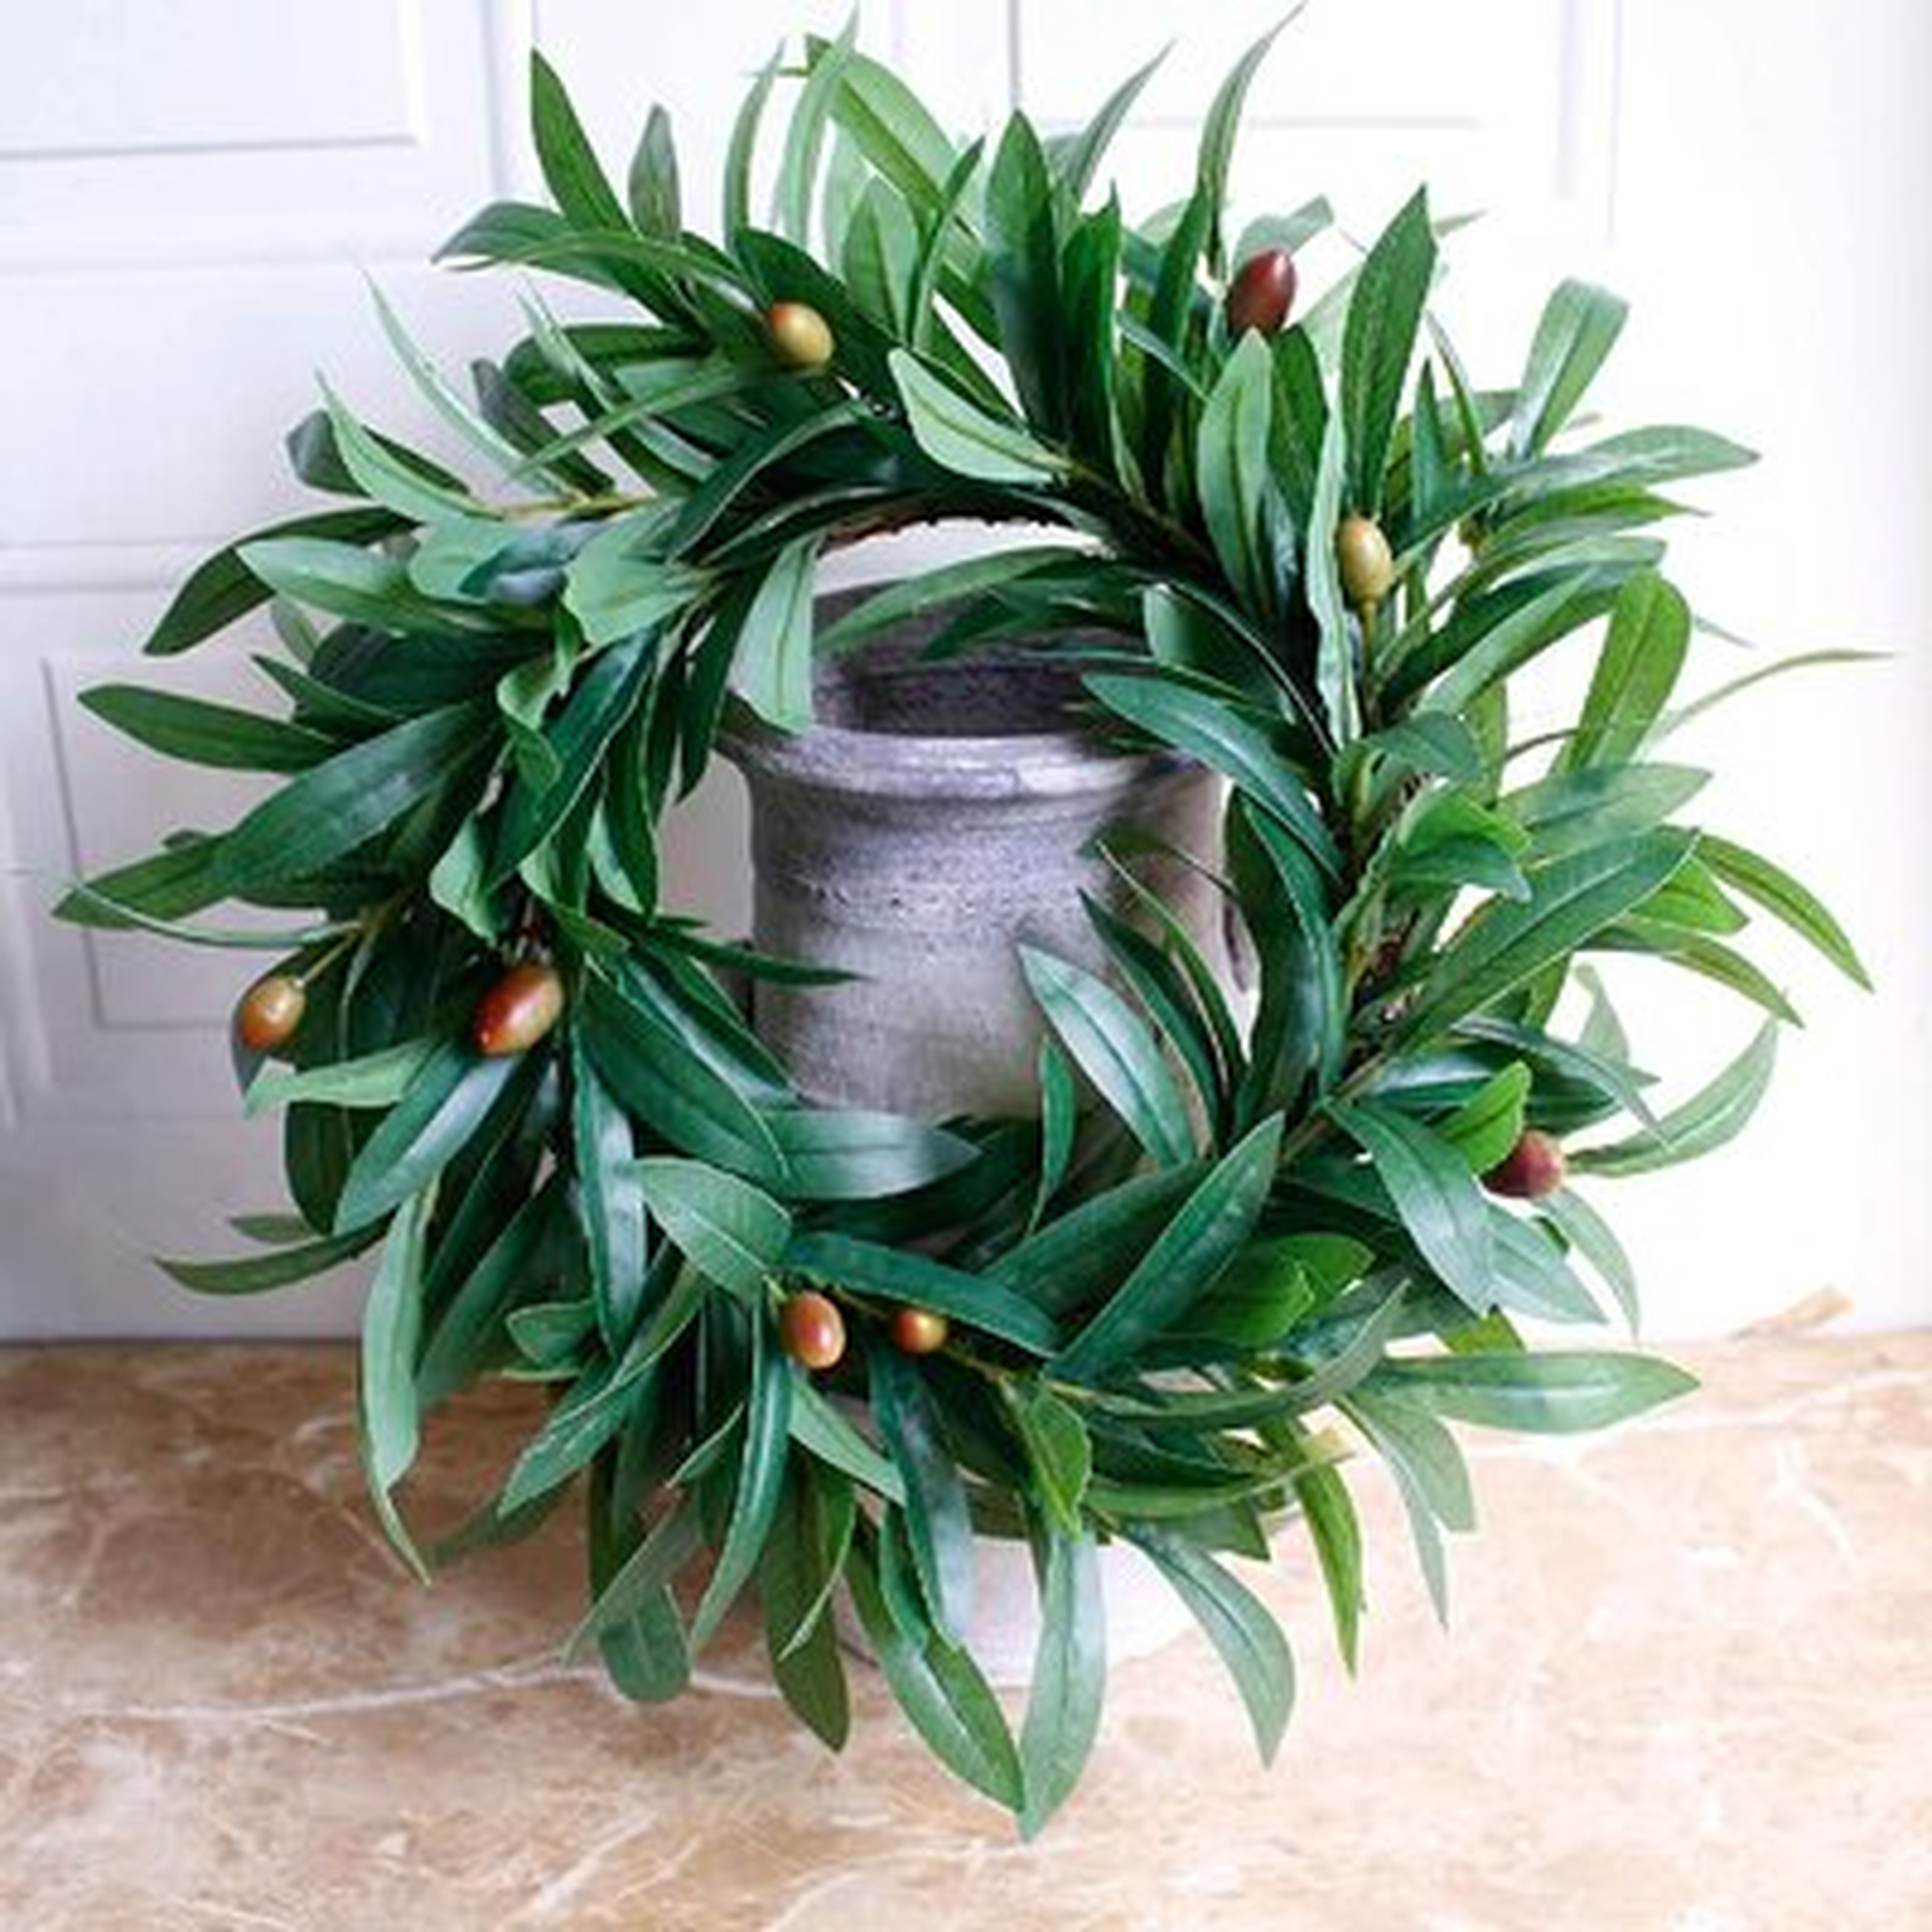 Wreath - Nearly Real, Olive Leaf:  Rustic Farmhouse, Greenery Wreaths, Faux Foliage Wreath, For Front Door, Welcome, Christmas, Outdoor, Indoor - Round - Wayfair